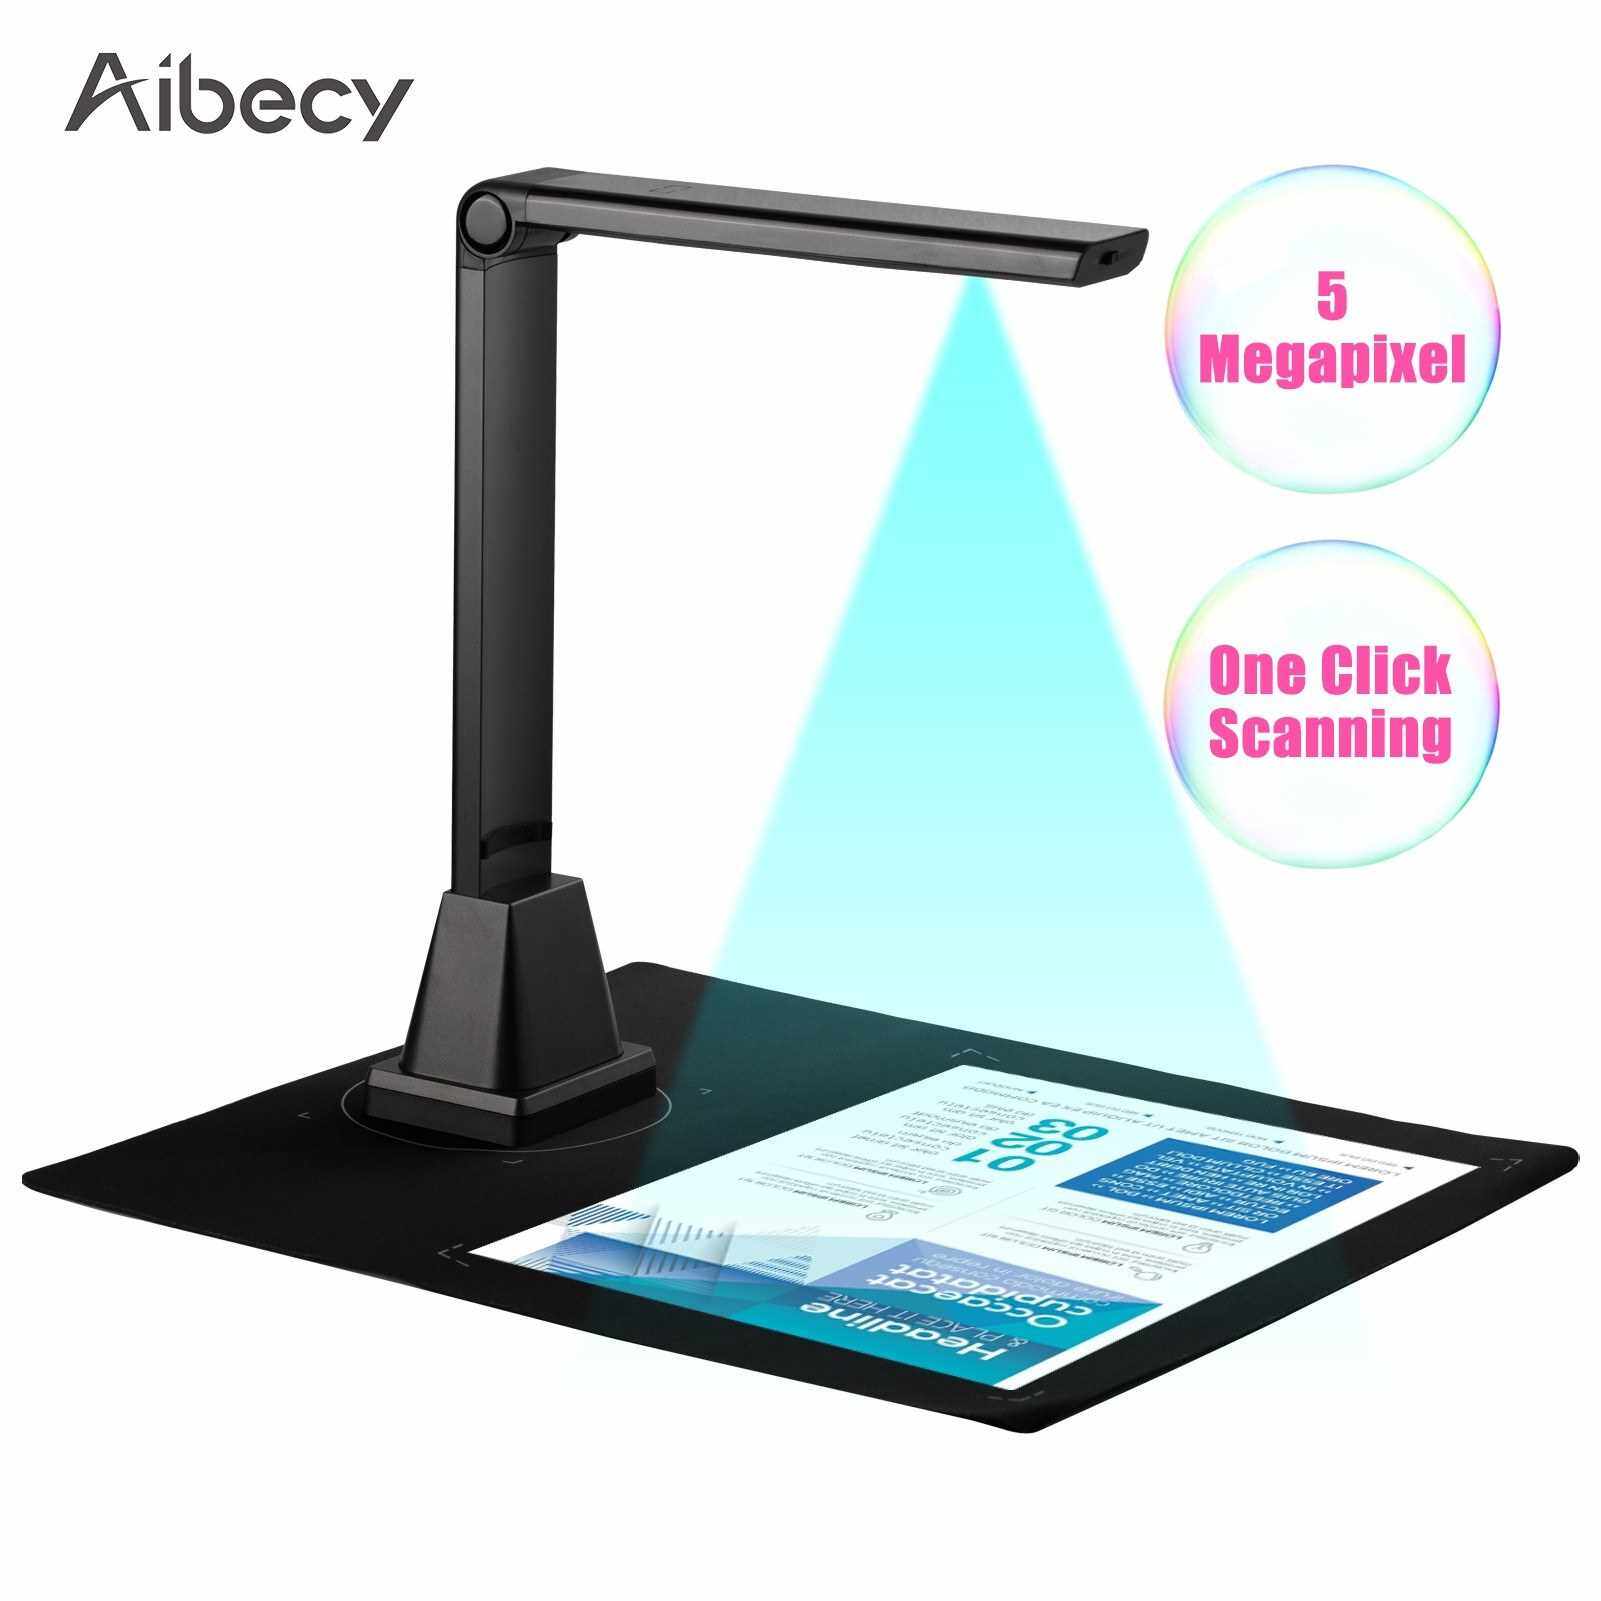 Best Selling Aibecy G500TS-R High Speed Document Camera Scanner 5 Megapixel Capture Size A4 Portable Scanner Support Multi-Language OCR Function File Barcode Scanning Video Recorder LED Light for Office Classroom Teaching Education (Standard)